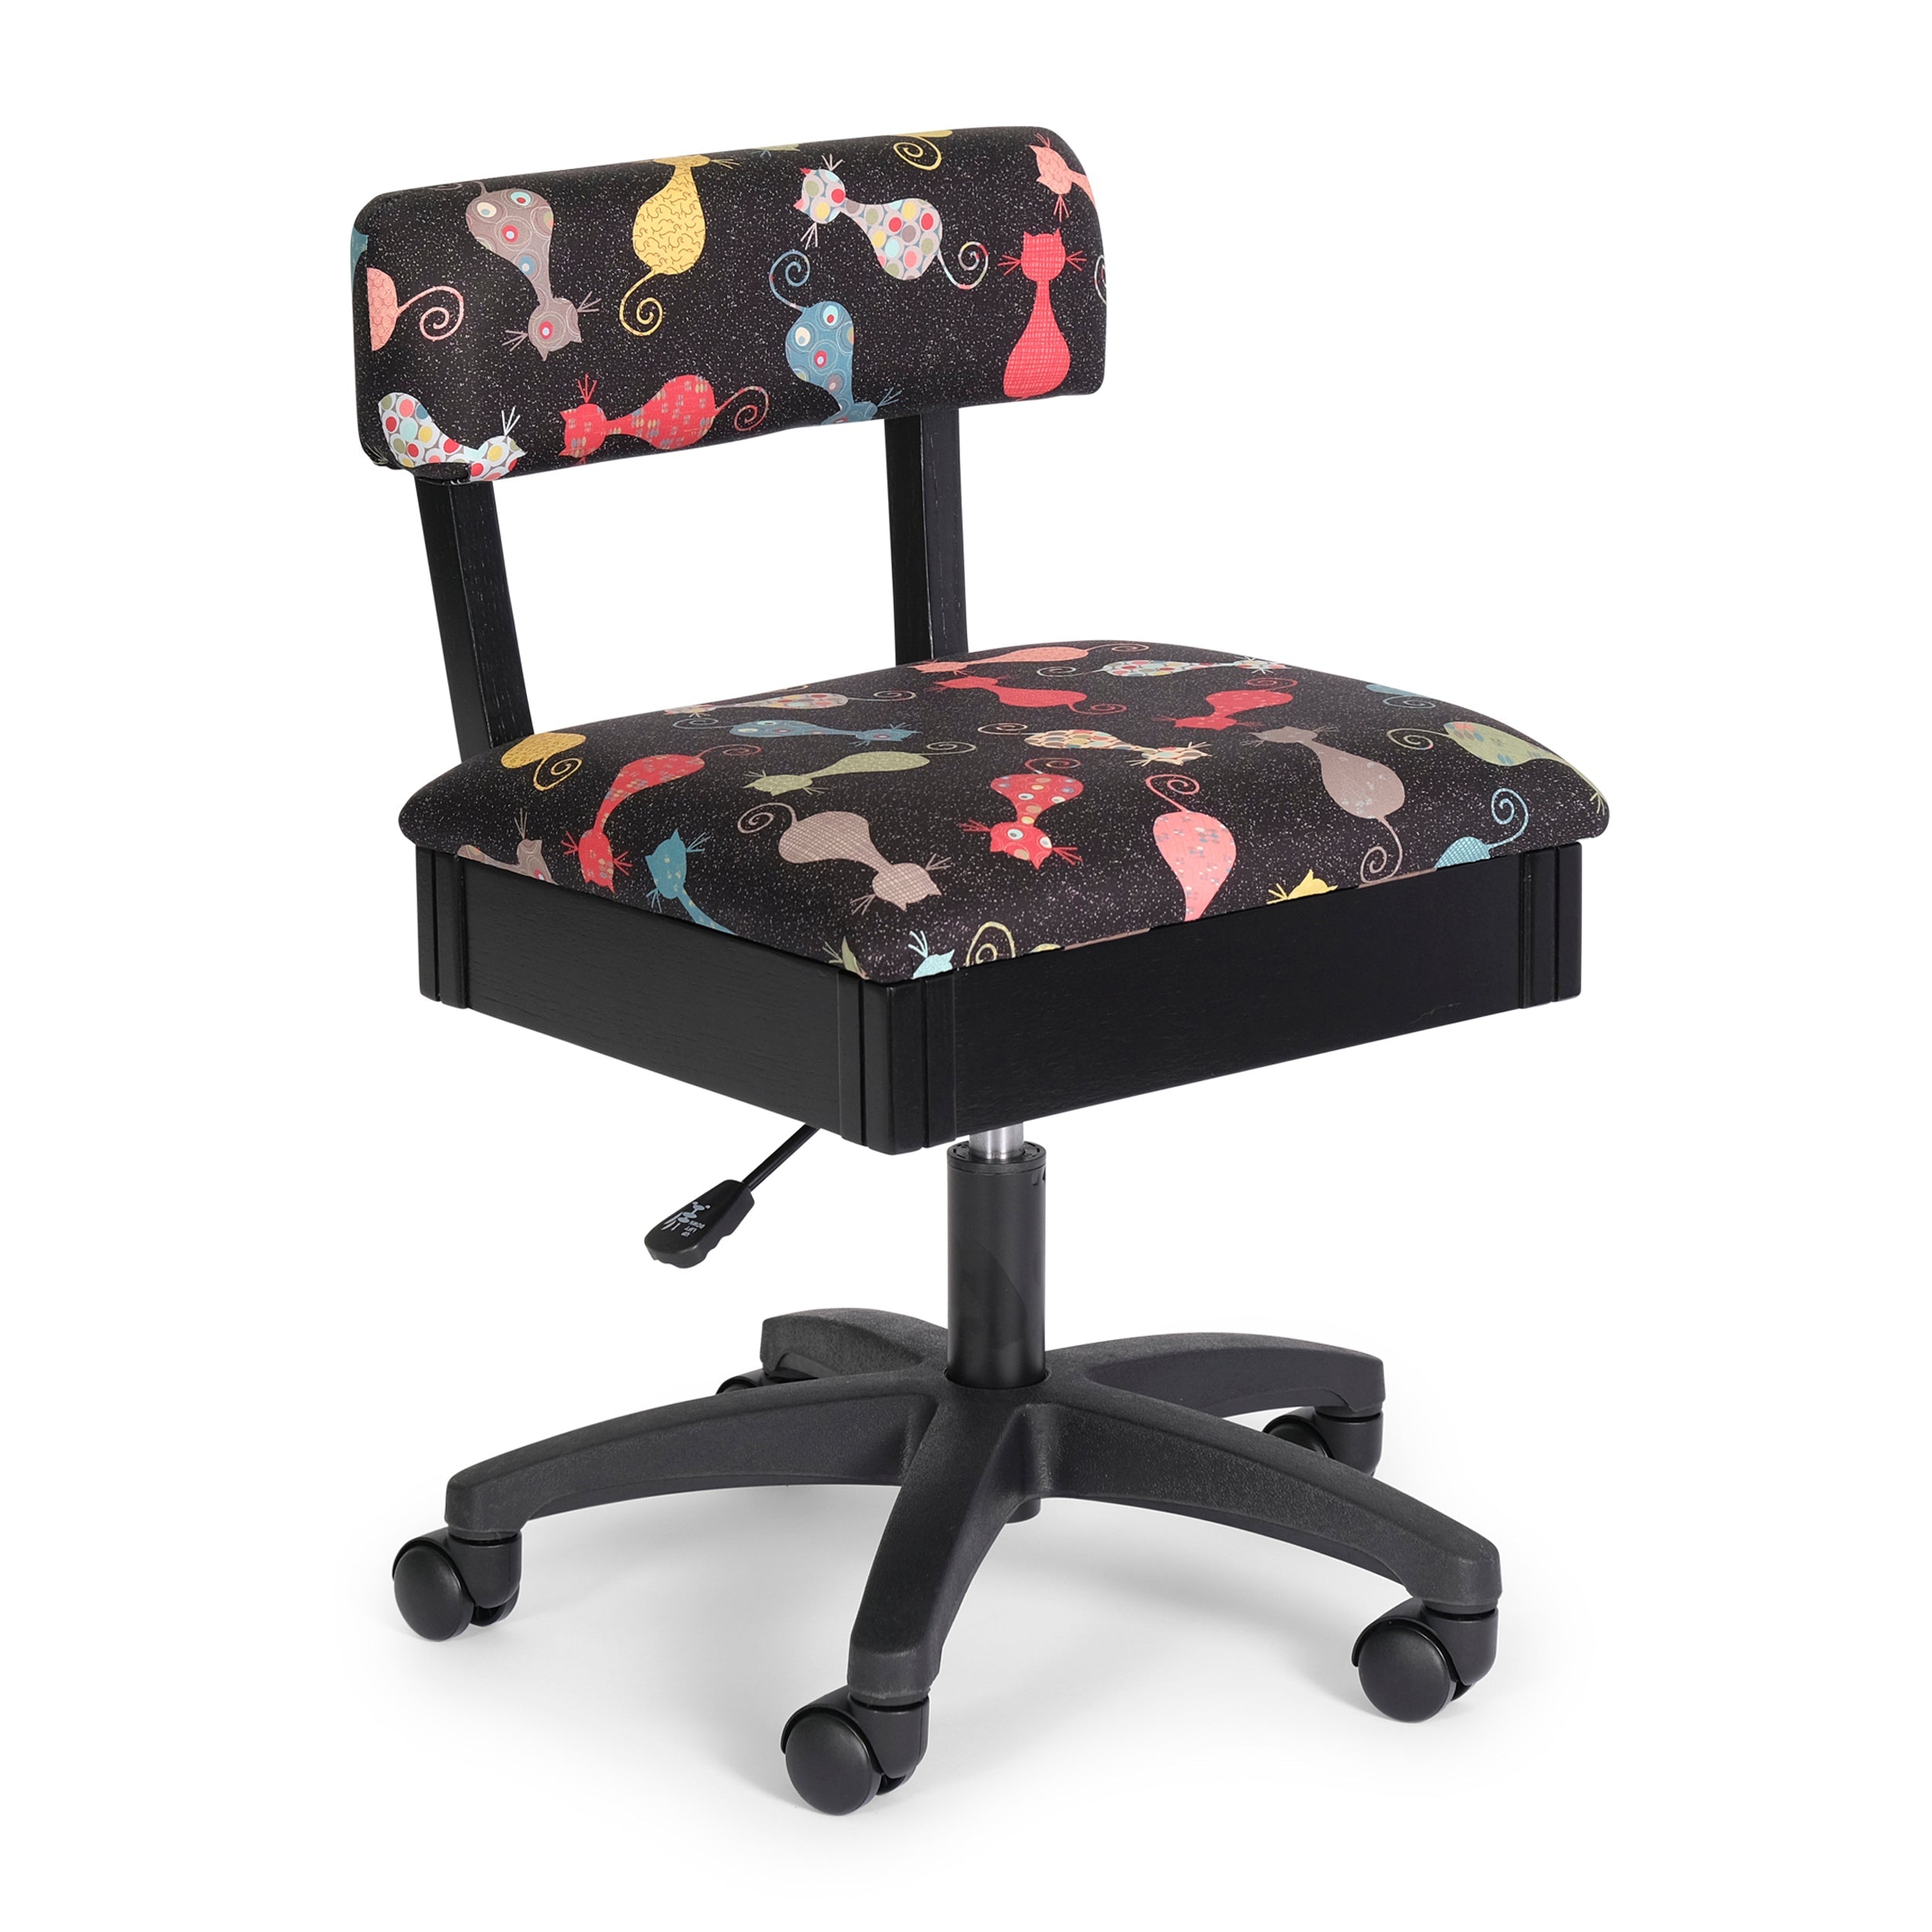 Arrow Height Adjustable Hydraulic Sewing Chair - Cat's Meow Black